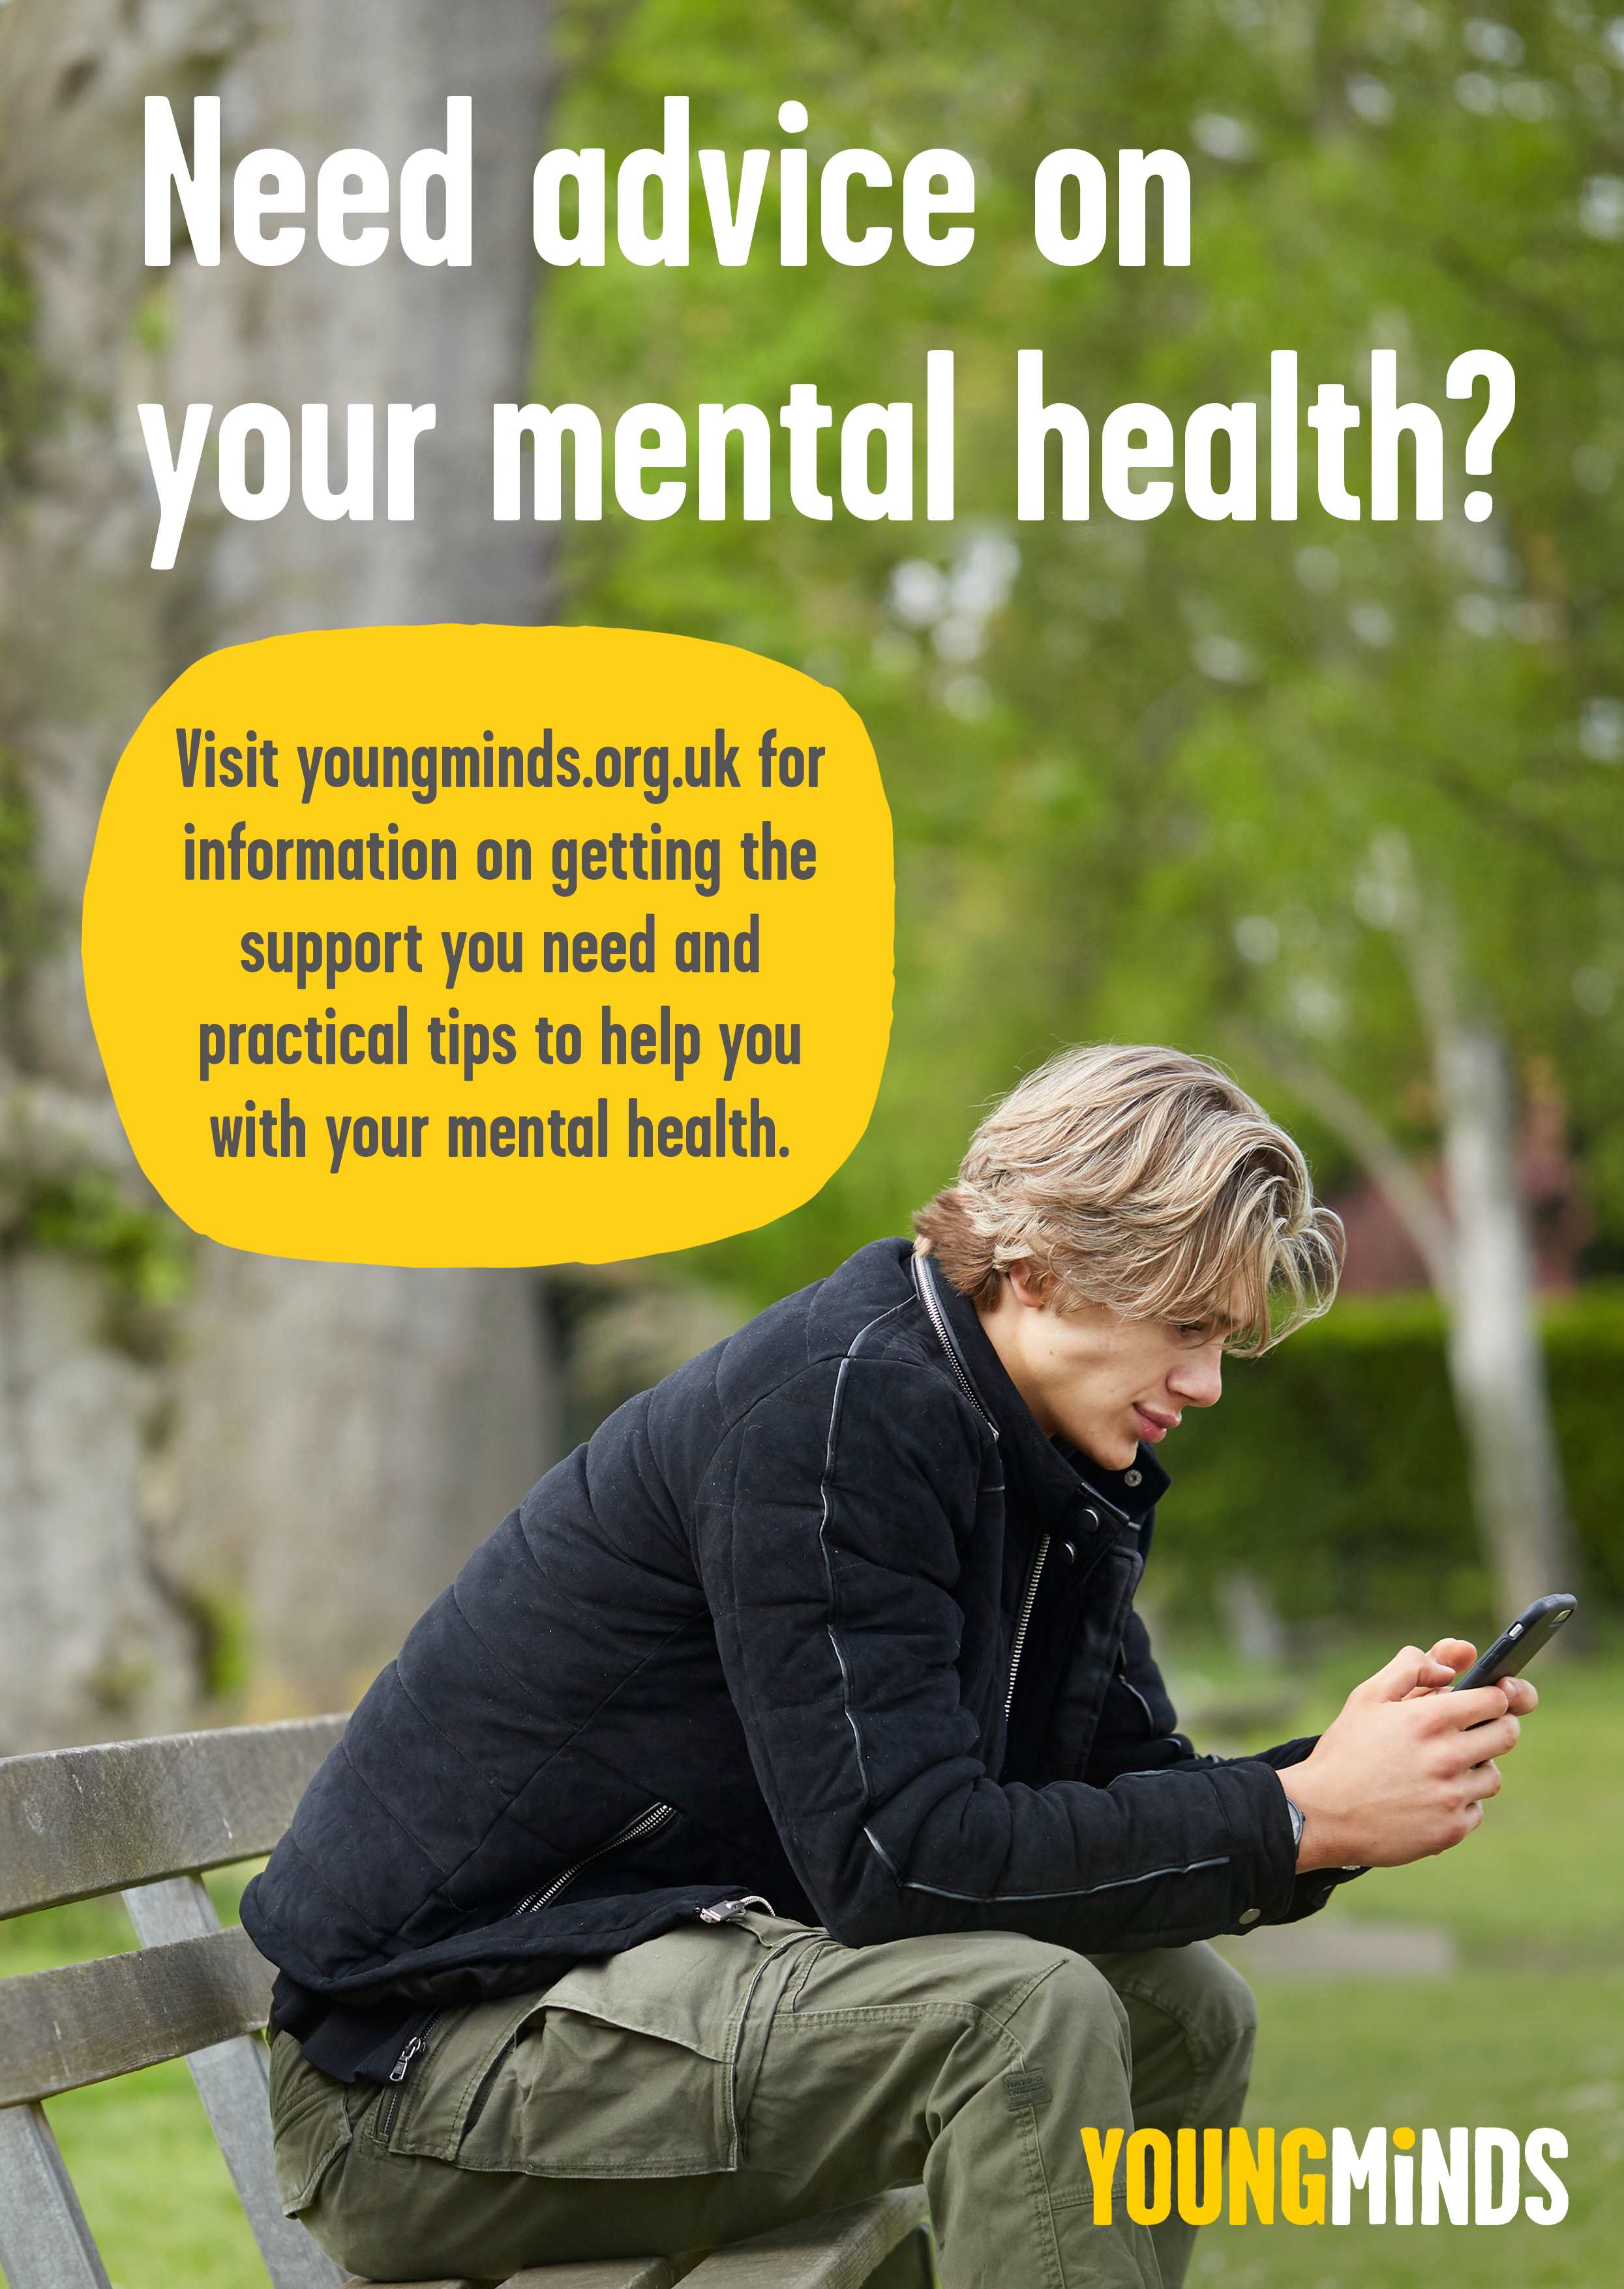 A preview of the poster reading 'Need advice on your mental health?'